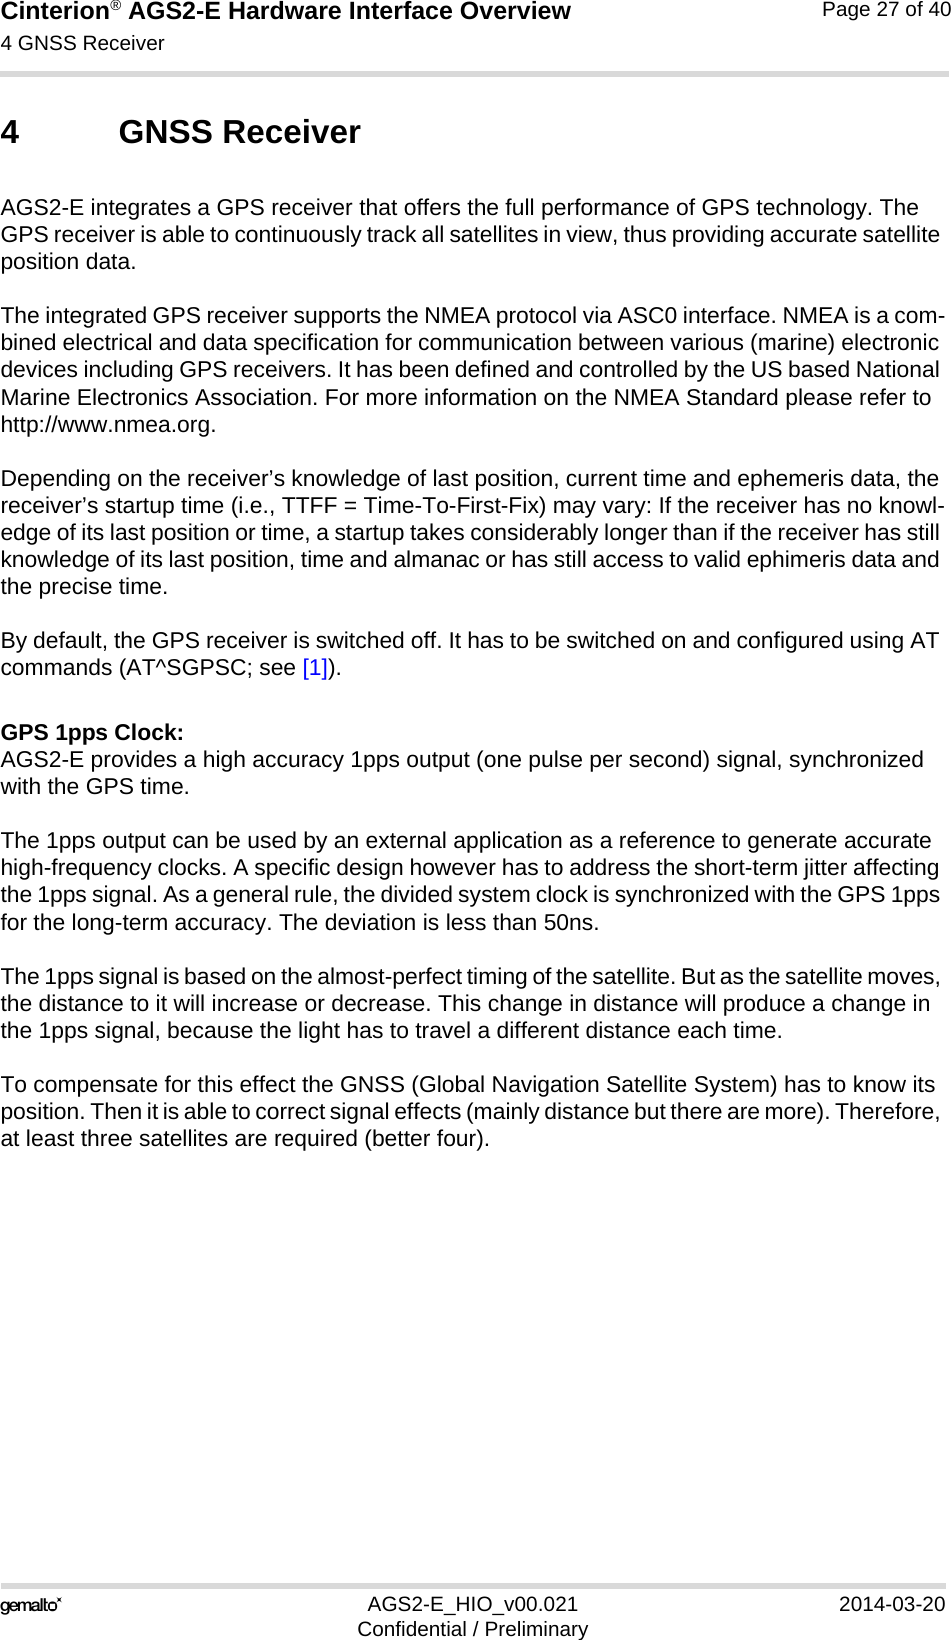 Cinterion® AGS2-E Hardware Interface Overview4 GNSS Receiver27AGS2-E_HIO_v00.021 2014-03-20Confidential / PreliminaryPage 27 of 404 GNSS ReceiverAGS2-E integrates a GPS receiver that offers the full performance of GPS technology. The GPS receiver is able to continuously track all satellites in view, thus providing accurate satellite position data.The integrated GPS receiver supports the NMEA protocol via ASC0 interface. NMEA is a com-bined electrical and data specification for communication between various (marine) electronic devices including GPS receivers. It has been defined and controlled by the US based National Marine Electronics Association. For more information on the NMEA Standard please refer to http://www.nmea.org.Depending on the receiver’s knowledge of last position, current time and ephemeris data, the receiver’s startup time (i.e., TTFF = Time-To-First-Fix) may vary: If the receiver has no knowl-edge of its last position or time, a startup takes considerably longer than if the receiver has still knowledge of its last position, time and almanac or has still access to valid ephimeris data and the precise time. By default, the GPS receiver is switched off. It has to be switched on and configured using AT commands (AT^SGPSC; see [1]). GPS 1pps Clock:AGS2-E provides a high accuracy 1pps output (one pulse per second) signal, synchronized with the GPS time. The 1pps output can be used by an external application as a reference to generate accurate high-frequency clocks. A specific design however has to address the short-term jitter affecting the 1pps signal. As a general rule, the divided system clock is synchronized with the GPS 1pps for the long-term accuracy. The deviation is less than 50ns.The 1pps signal is based on the almost-perfect timing of the satellite. But as the satellite moves, the distance to it will increase or decrease. This change in distance will produce a change in the 1pps signal, because the light has to travel a different distance each time.To compensate for this effect the GNSS (Global Navigation Satellite System) has to know its position. Then it is able to correct signal effects (mainly distance but there are more). Therefore, at least three satellites are required (better four).